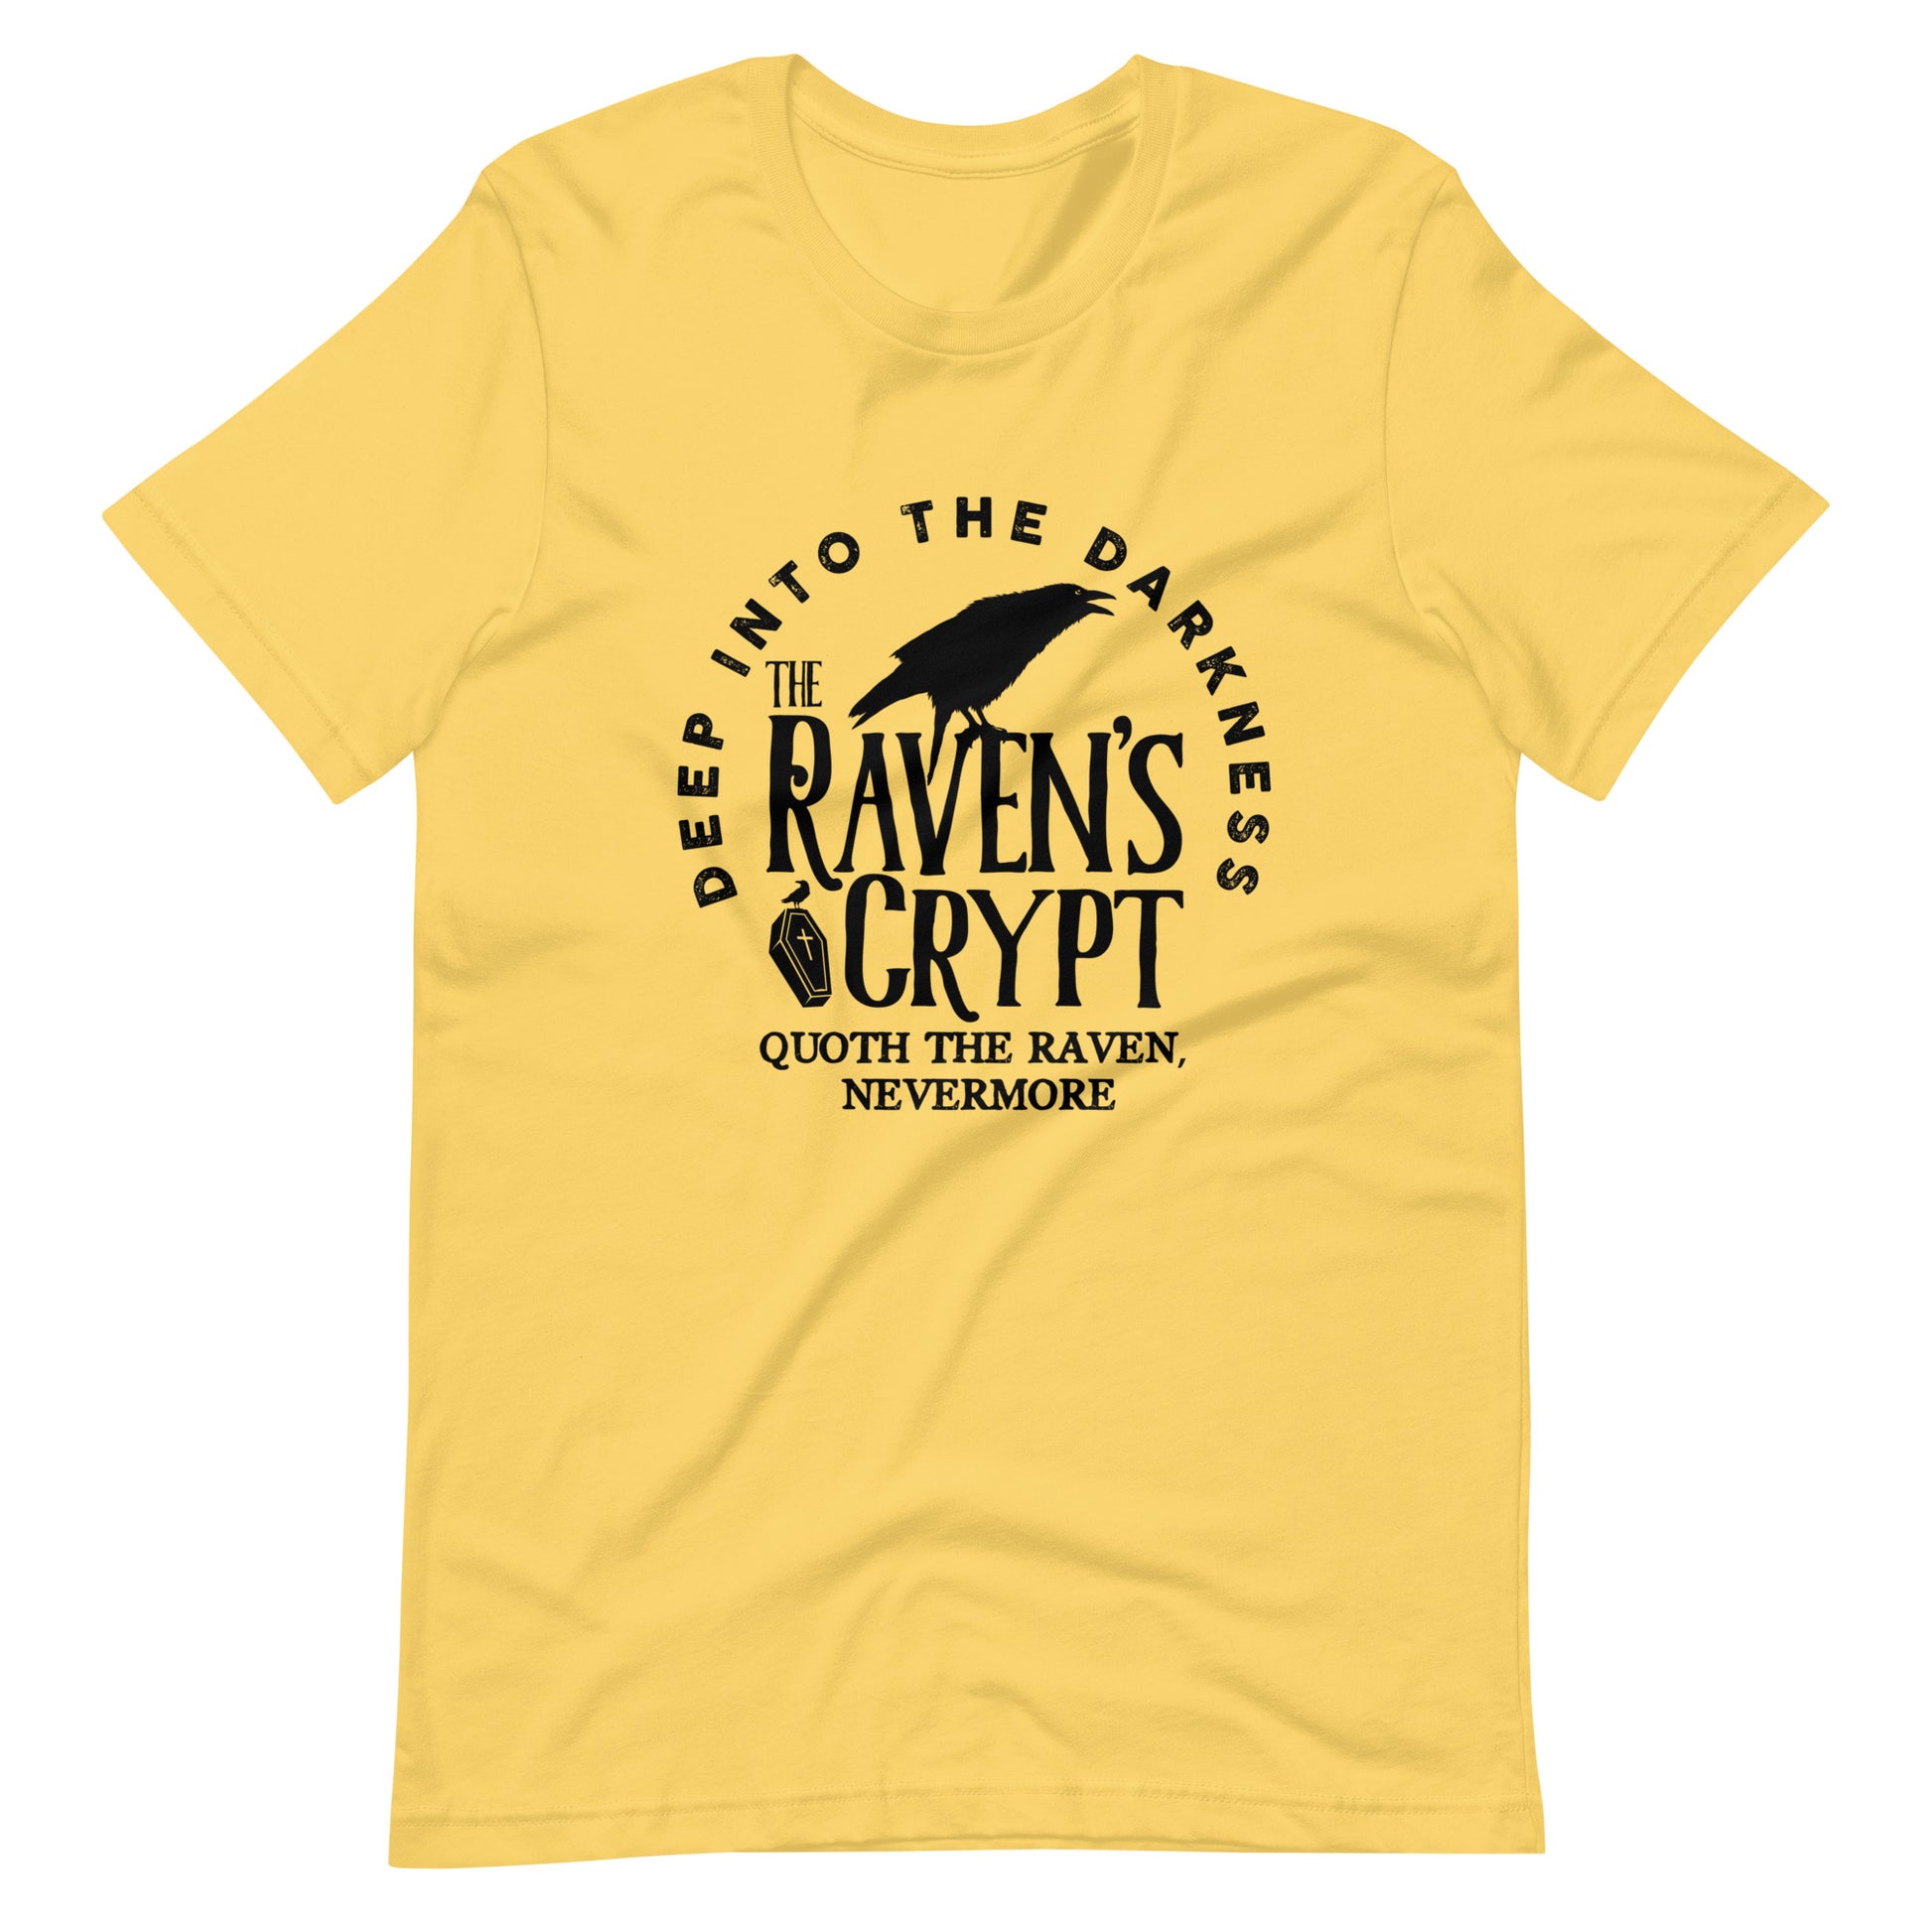 Deep Into the Darkness The Raven's Crypt - Men's t-shirt - Yellow Front